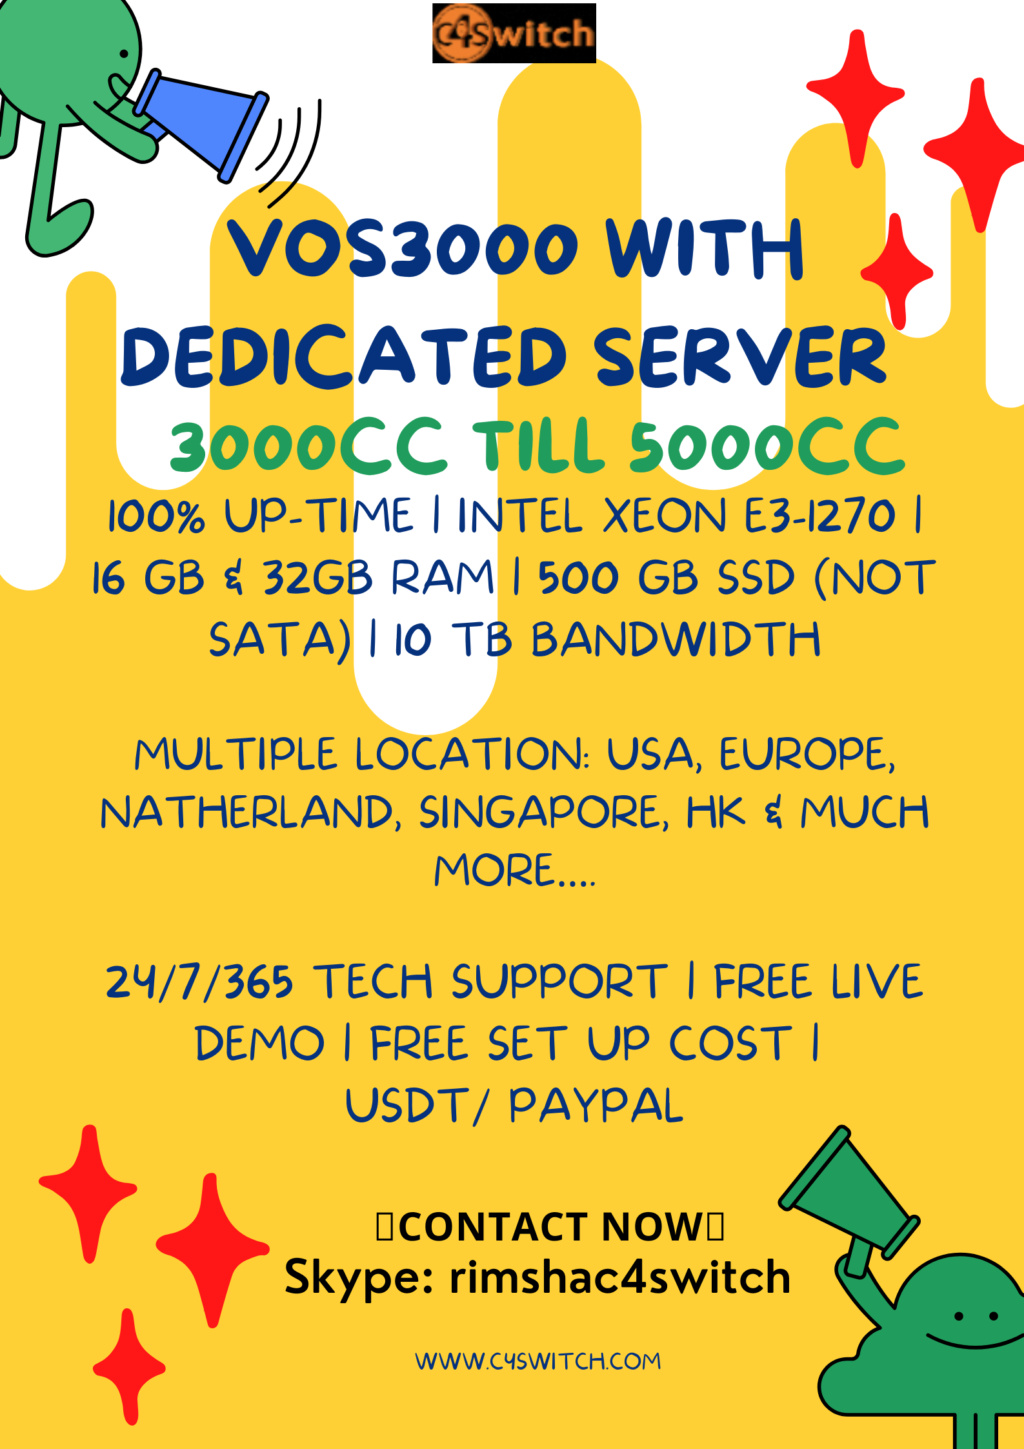 VOS3000 with DEDICATED SERVERS & MULTIPLE CO LOCATIONS.. Vos30012